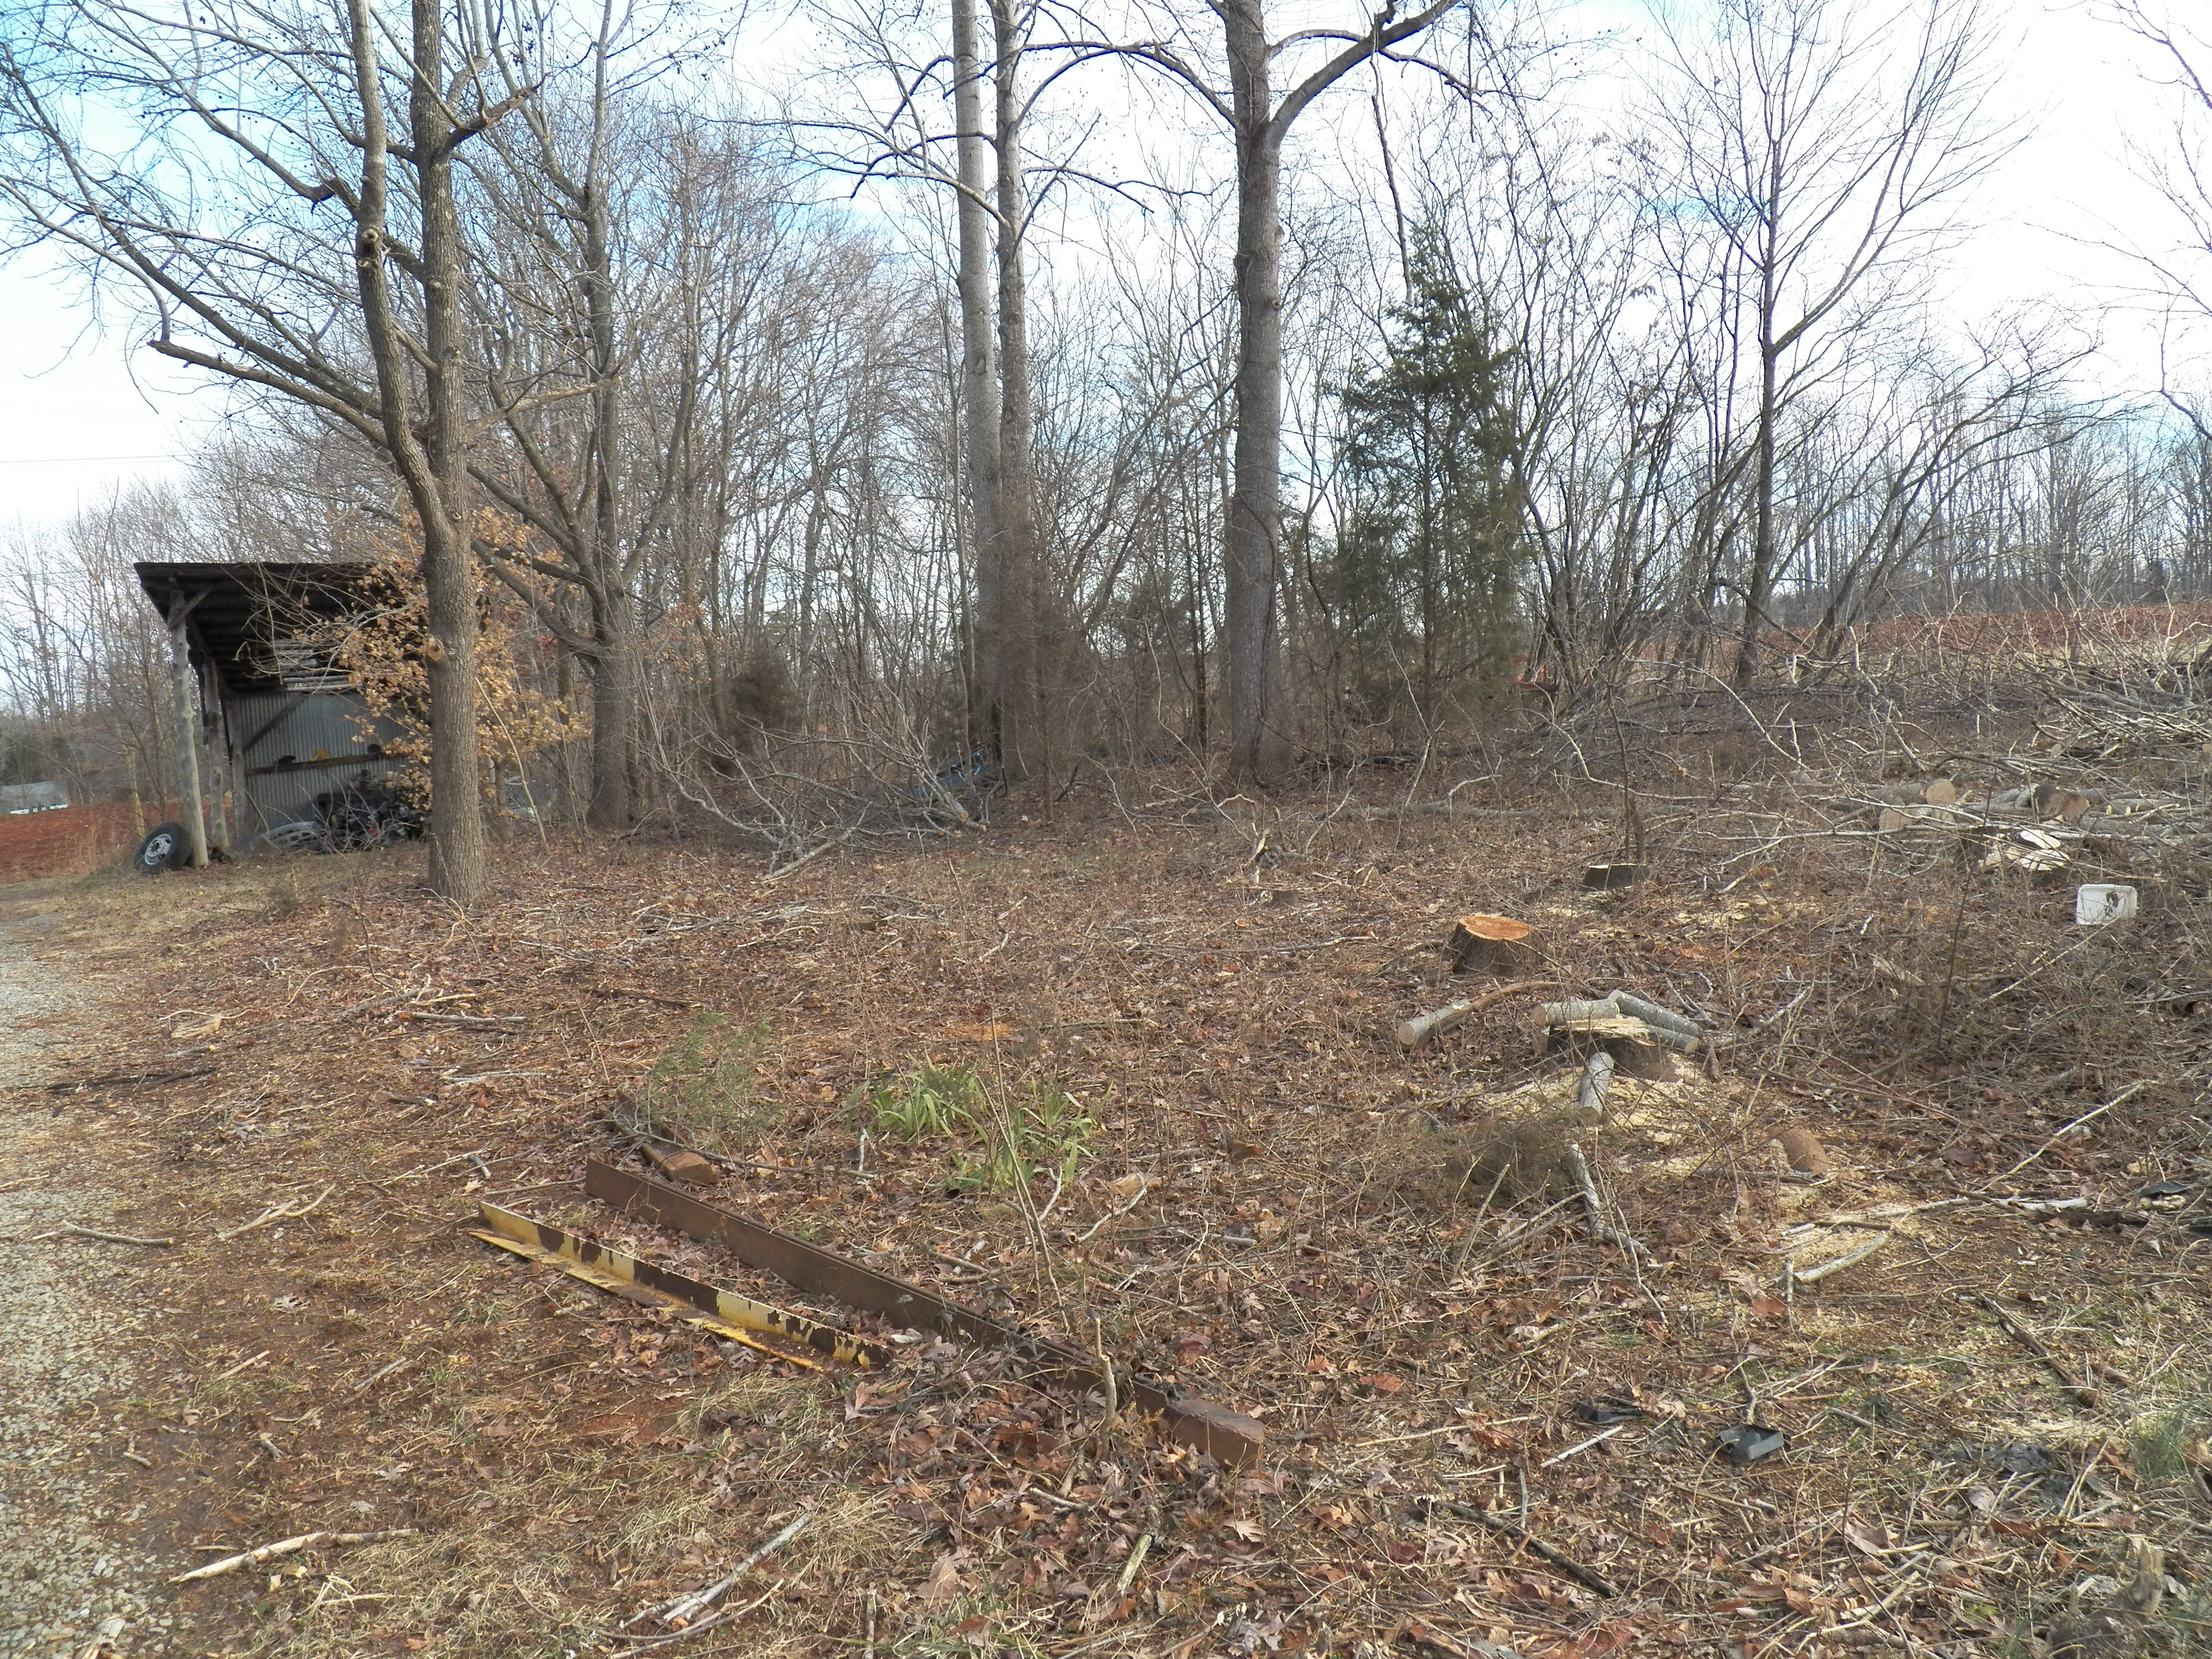 We began clearing the brush in January, after winter set in and the foliage died back.